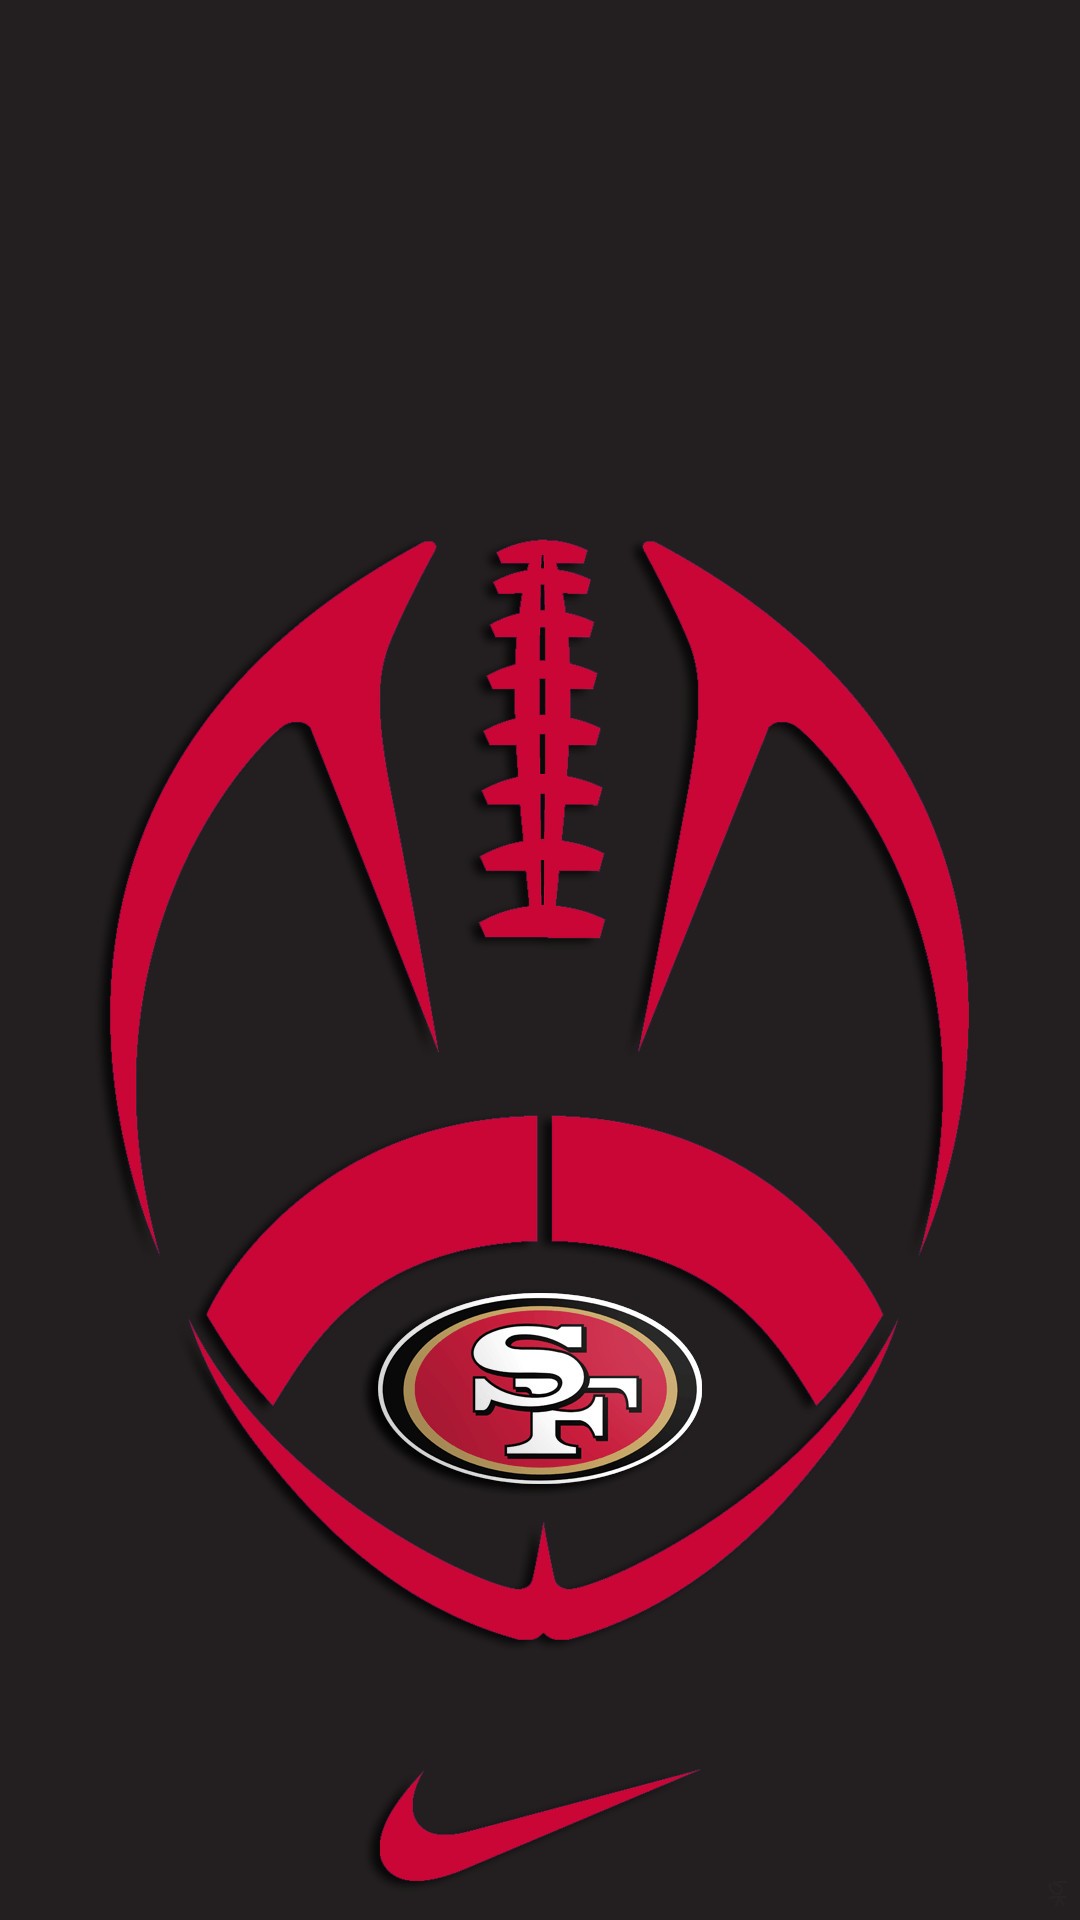 San Francisco 49ers iPhone Wallpaper Size With high-resolution 1080X1920 pixel. Donwload and set as wallpaper for your iPhone X, iPhone XS home screen backgrounds, XS Max, XR, iPhone8 lock screen wallpaper, iPhone 7, 6, SE, and other mobile devices